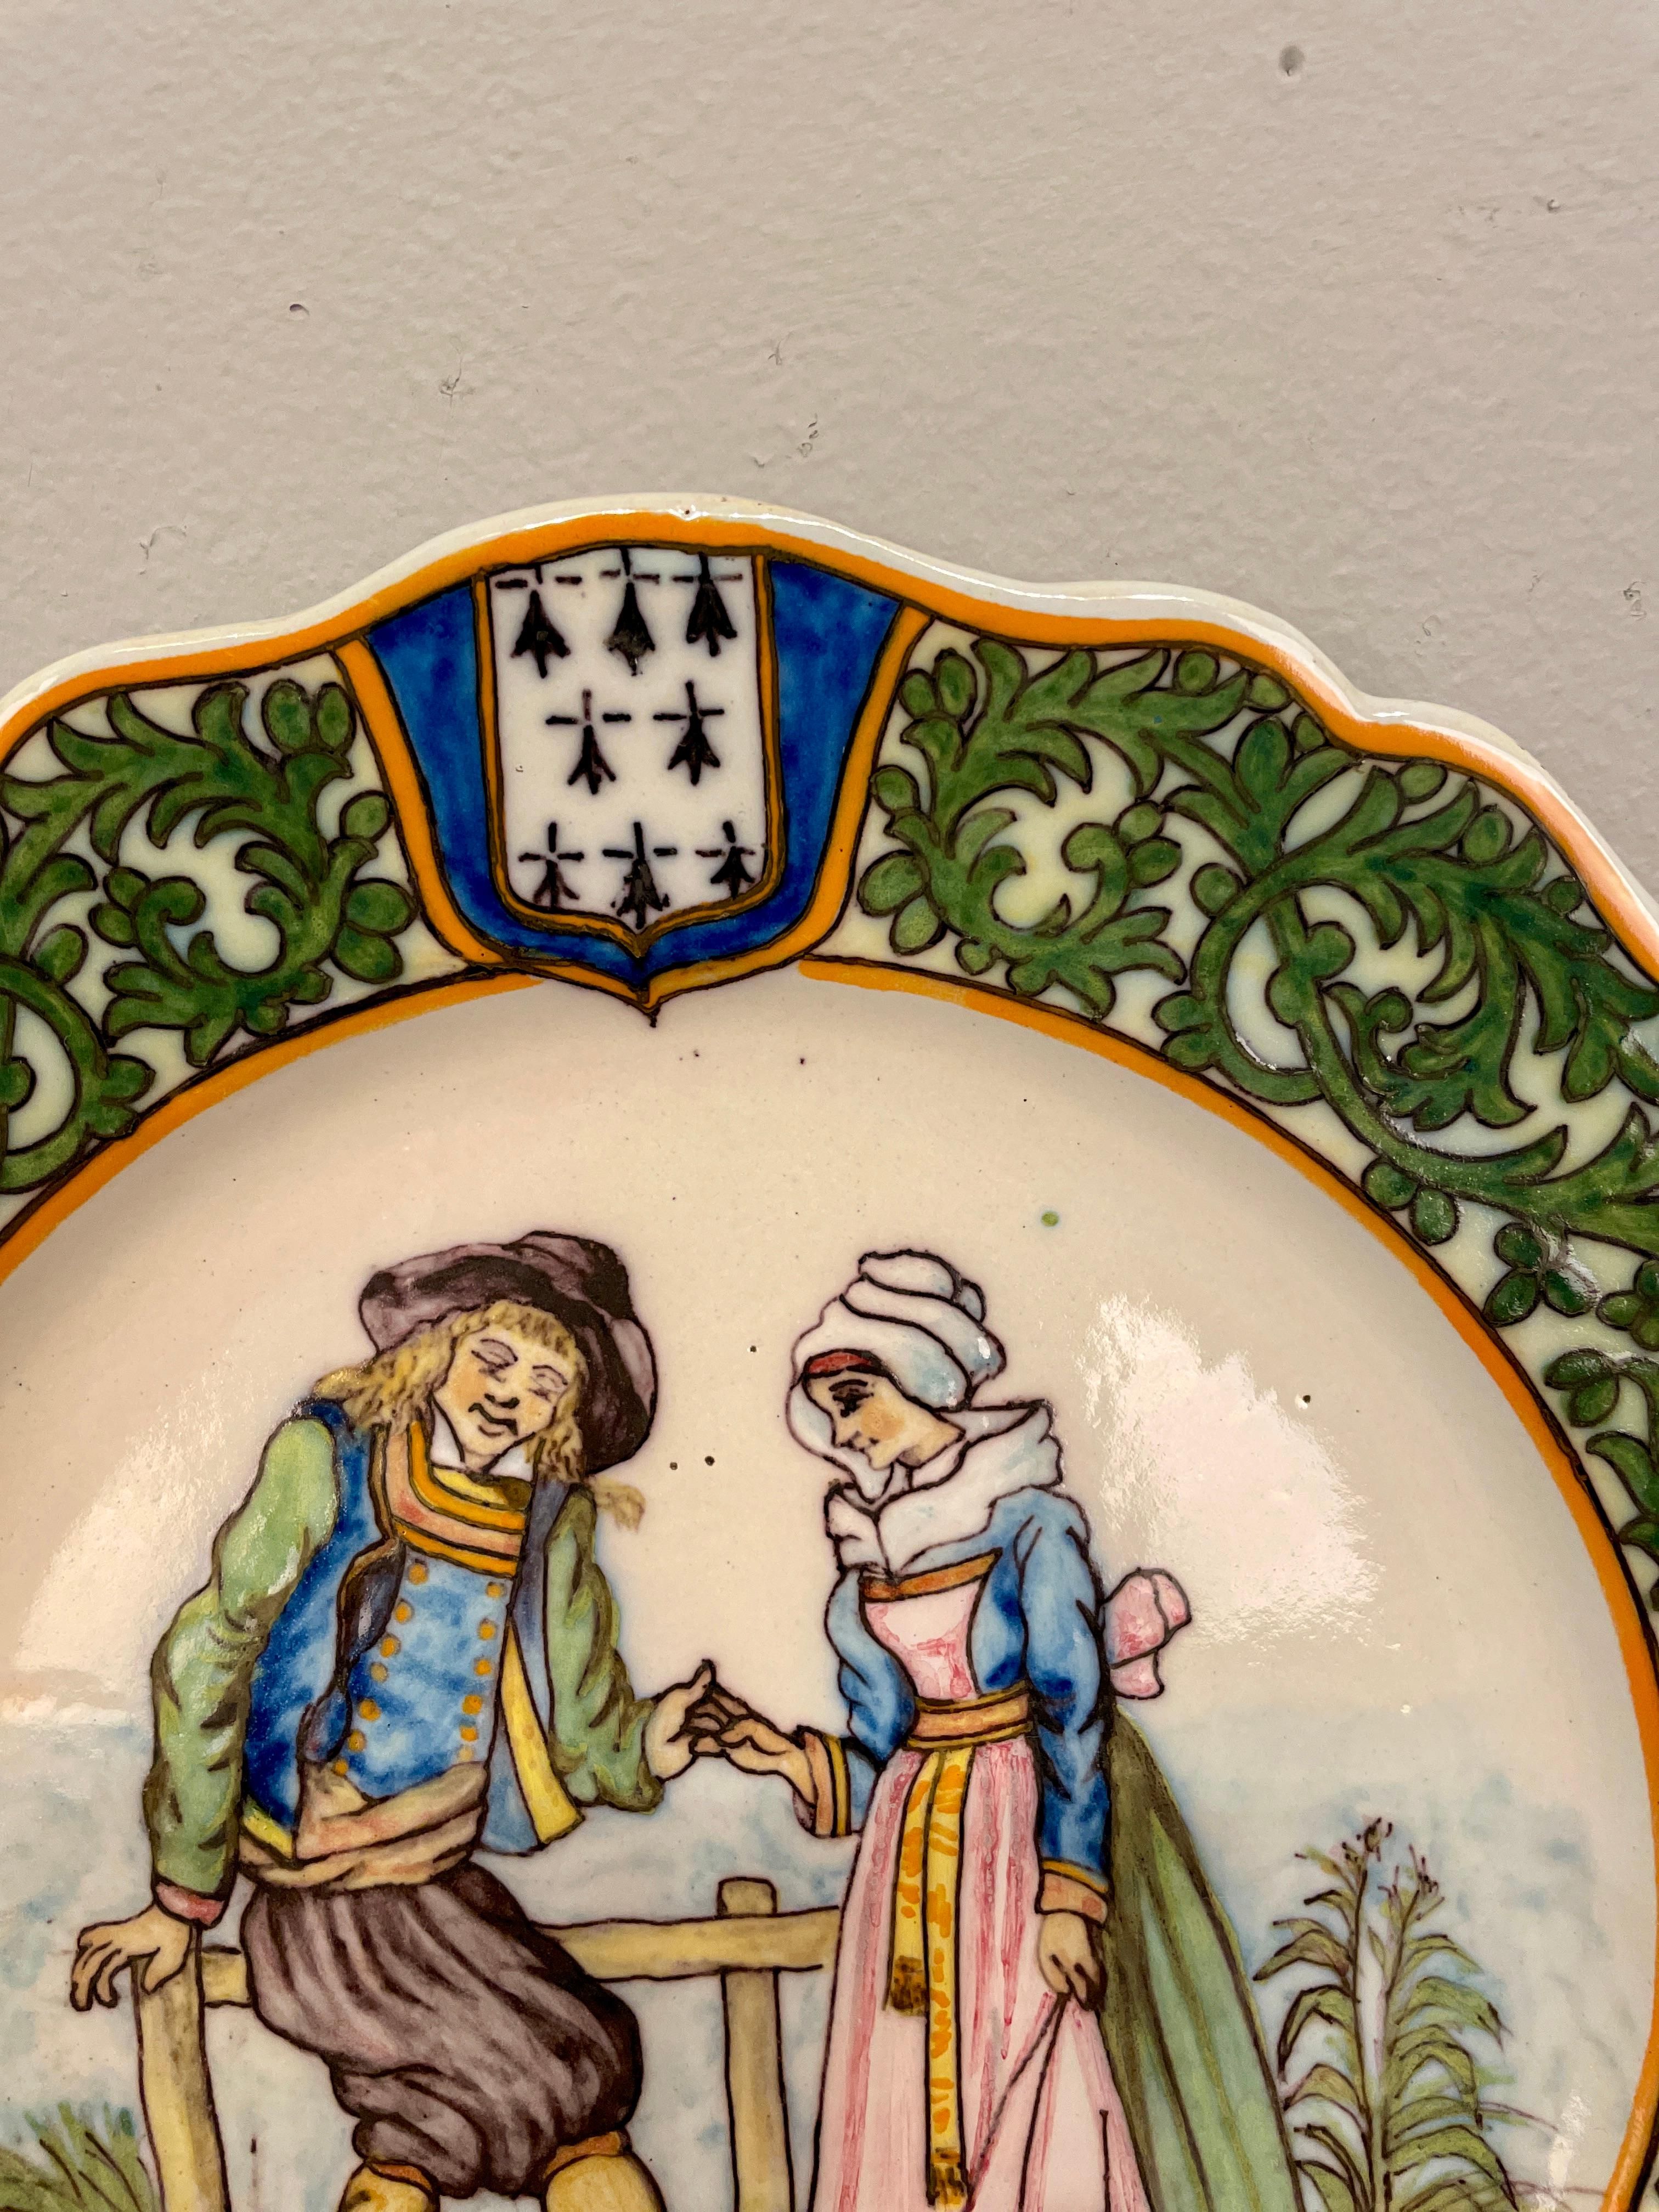 A good 19th century French Porquier Beau Quimper Plate with a  dark green border depicting a courting scene. Good details and in no chips nor hairline.
Signed on the back. Minor wear. Circa 1880-1900
Dimensions are 9.25